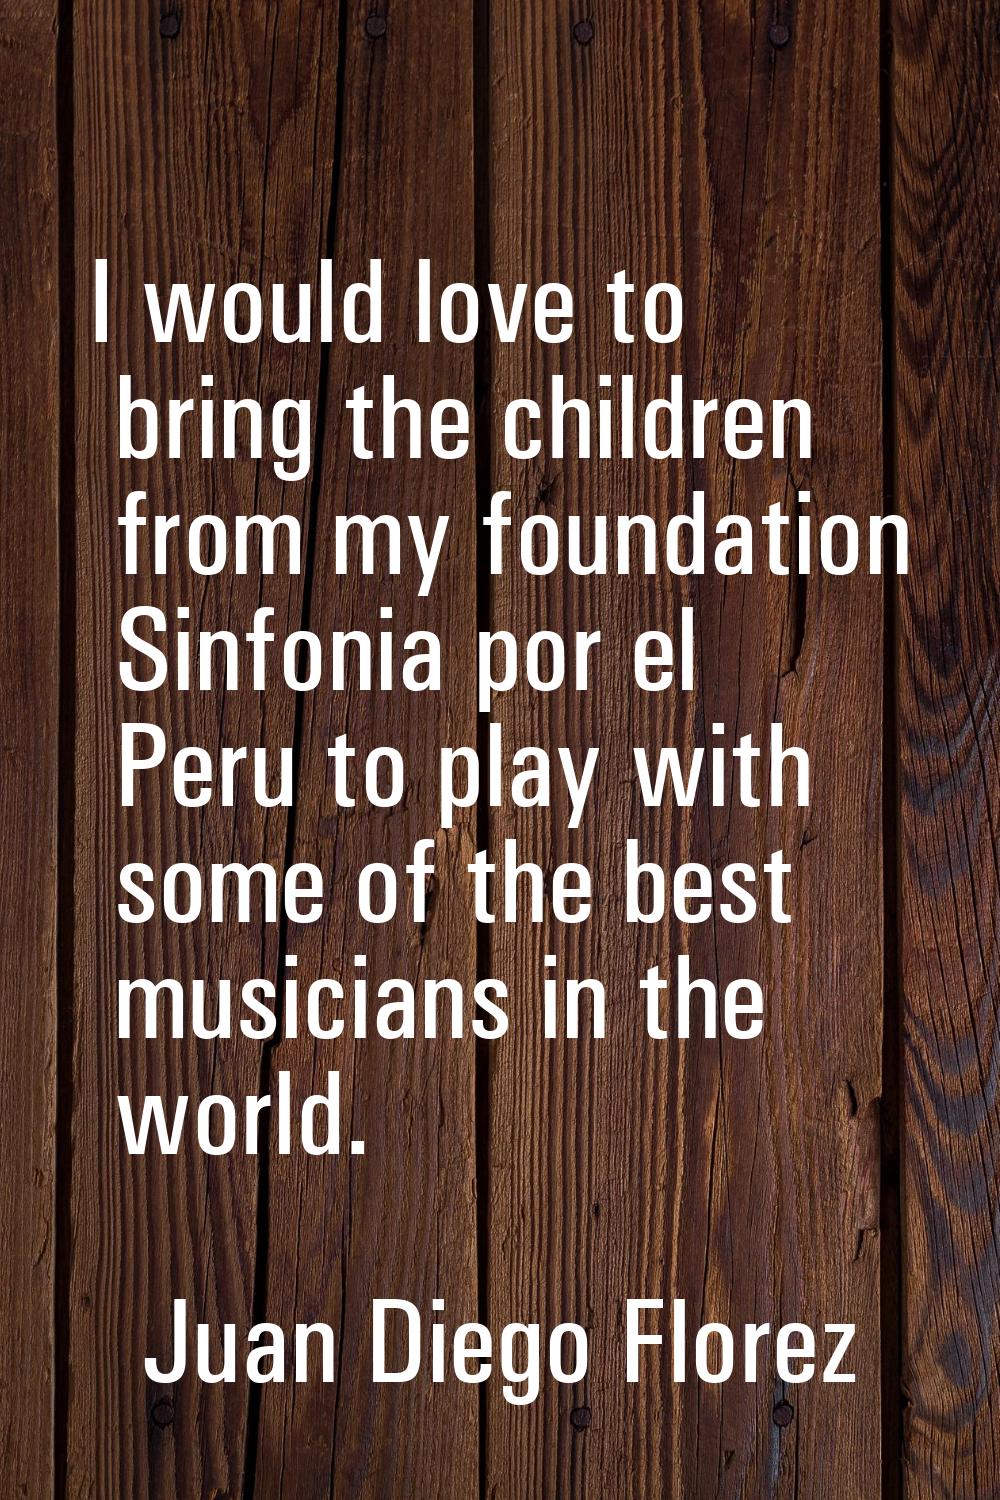 I would love to bring the children from my foundation Sinfonia por el Peru to play with some of the